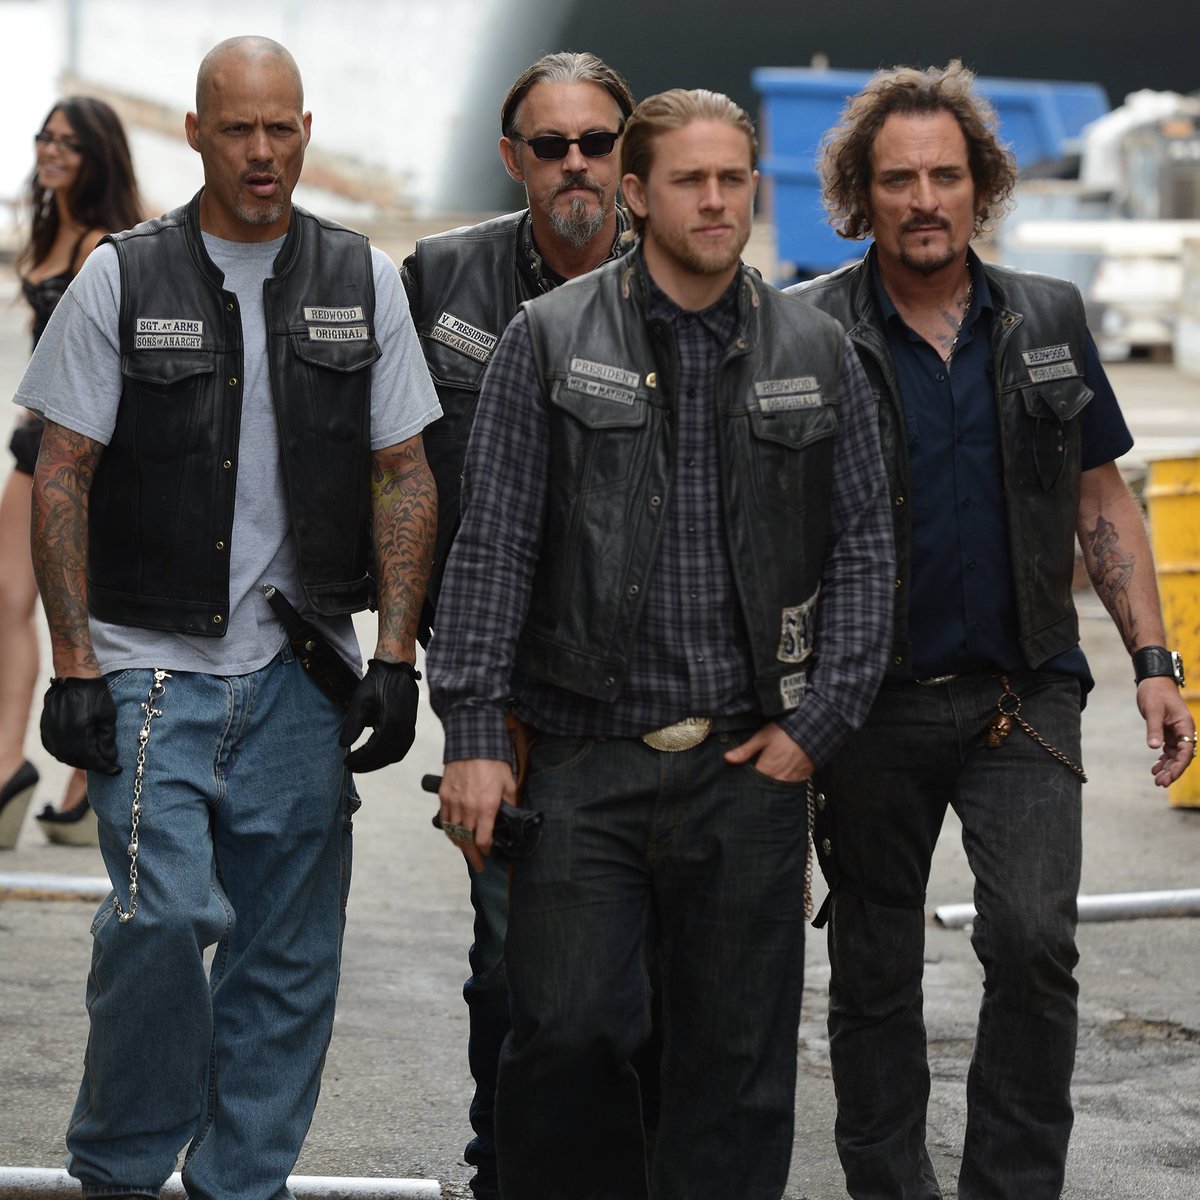 Better hope they’re not coming for you. All episodes of FX’s Sons of Anarchy are now available. Stream on Hulu.